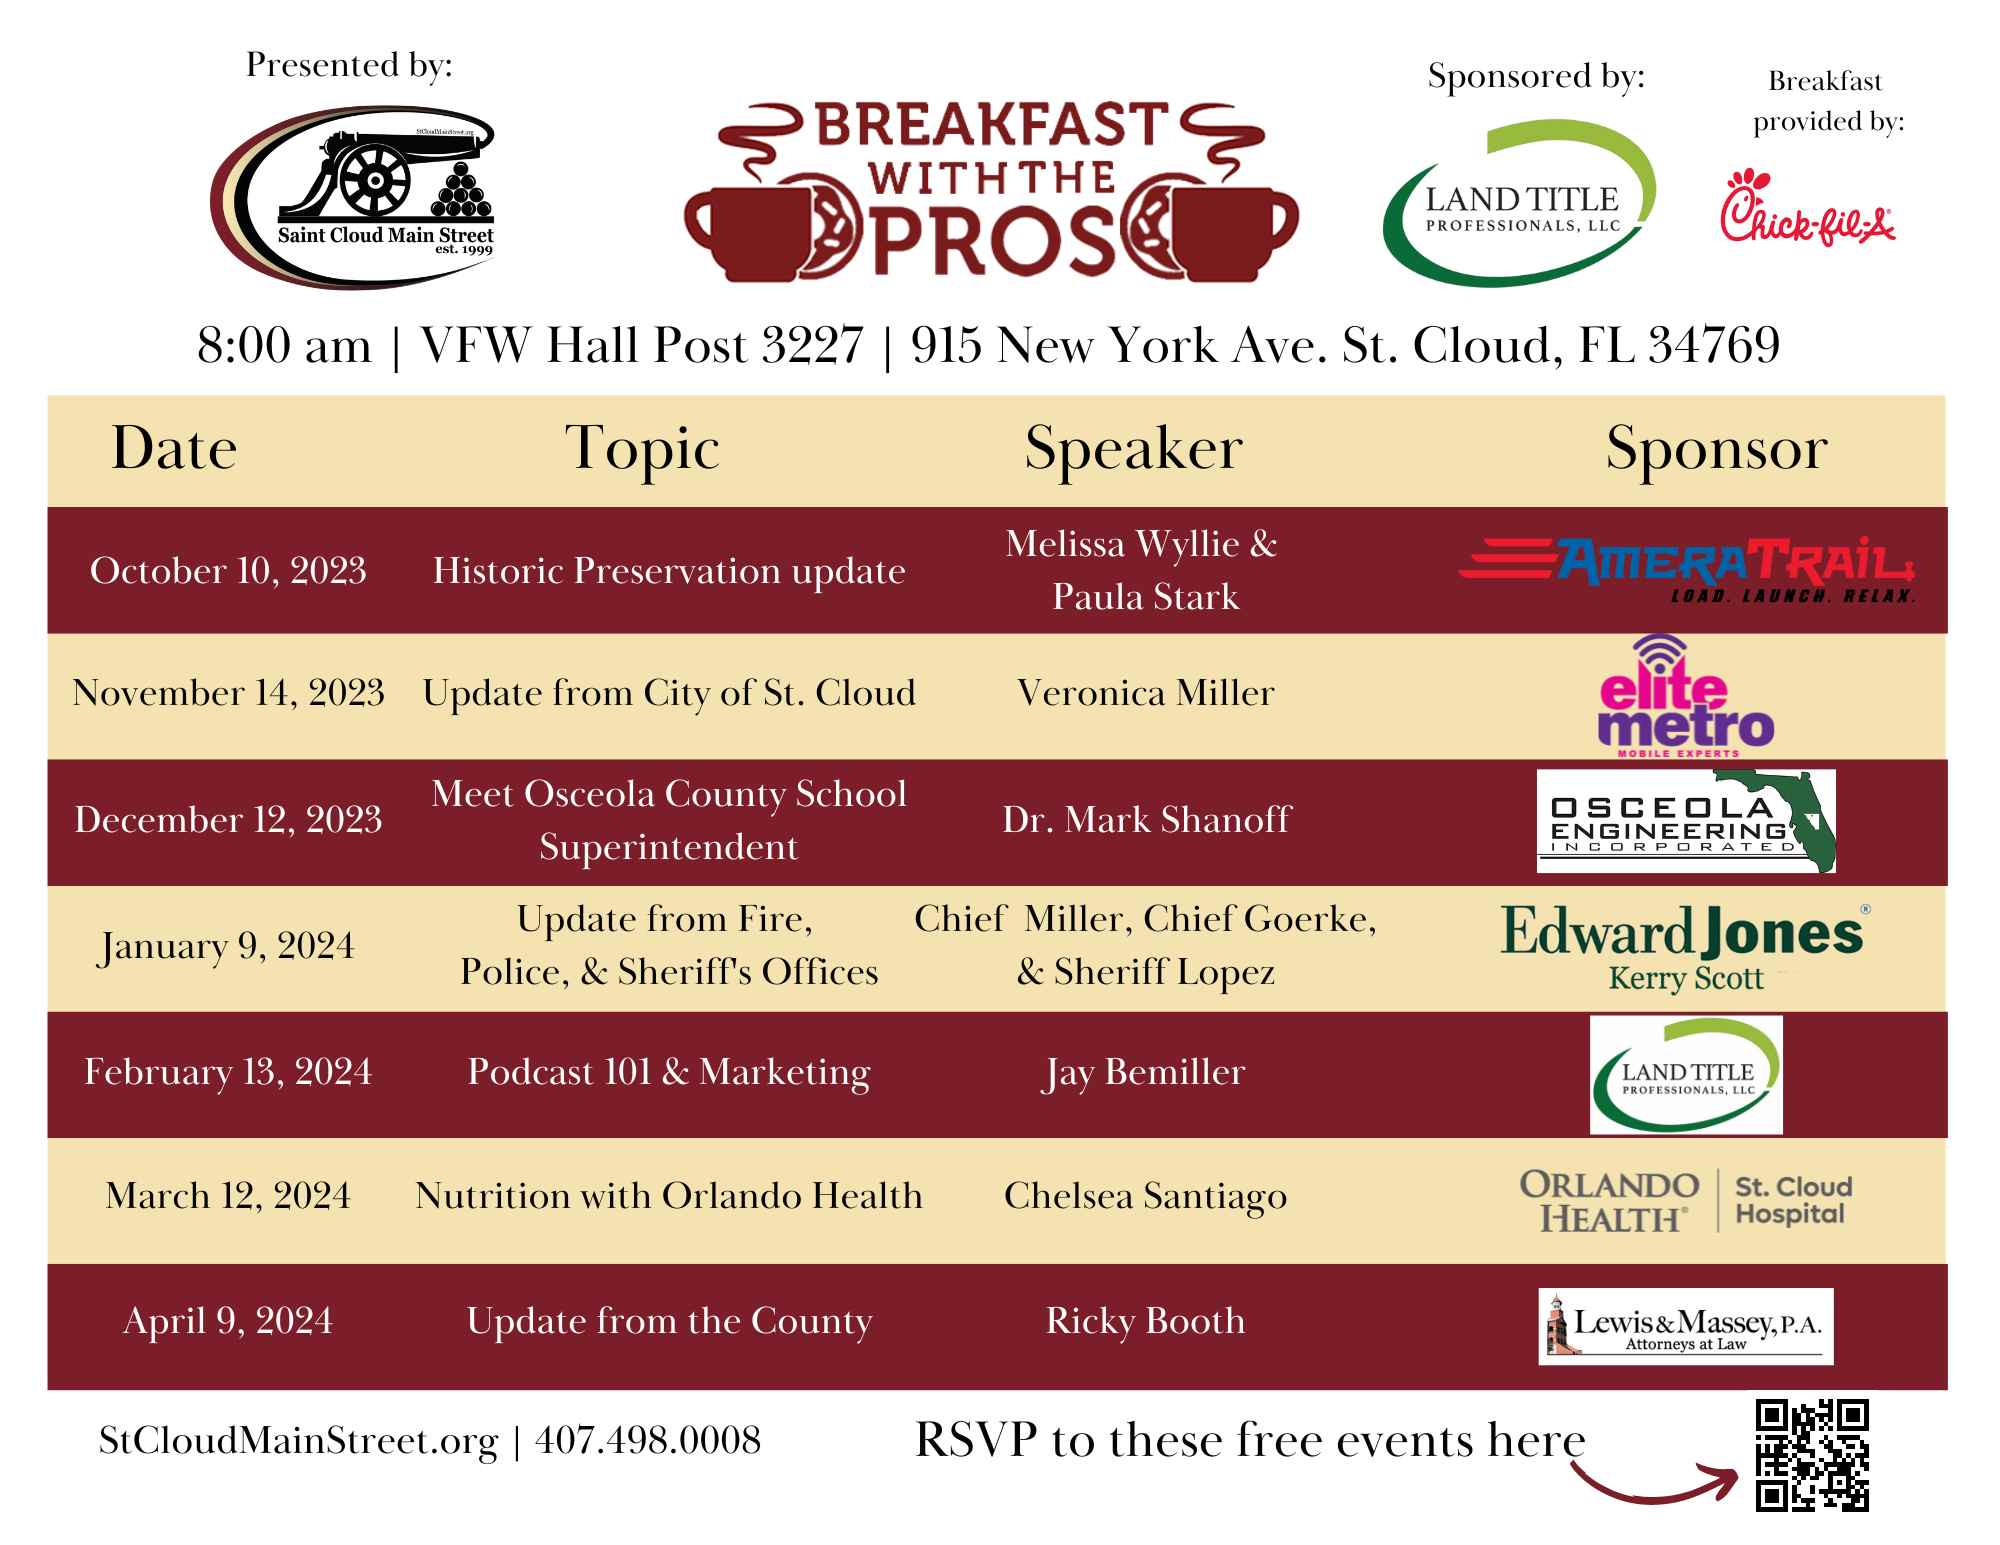 Flyer with information about Breakfast with the pros dates